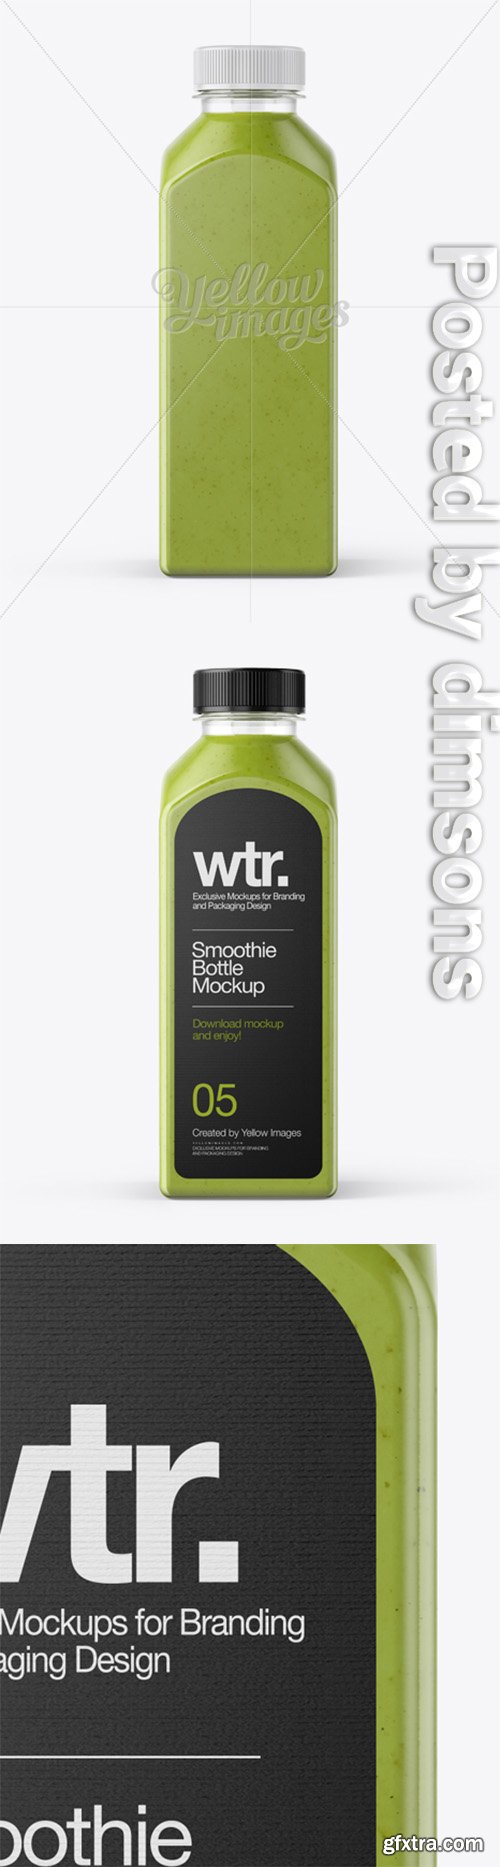 Square Green Smoothie Bottle Mockup - Front View 14580